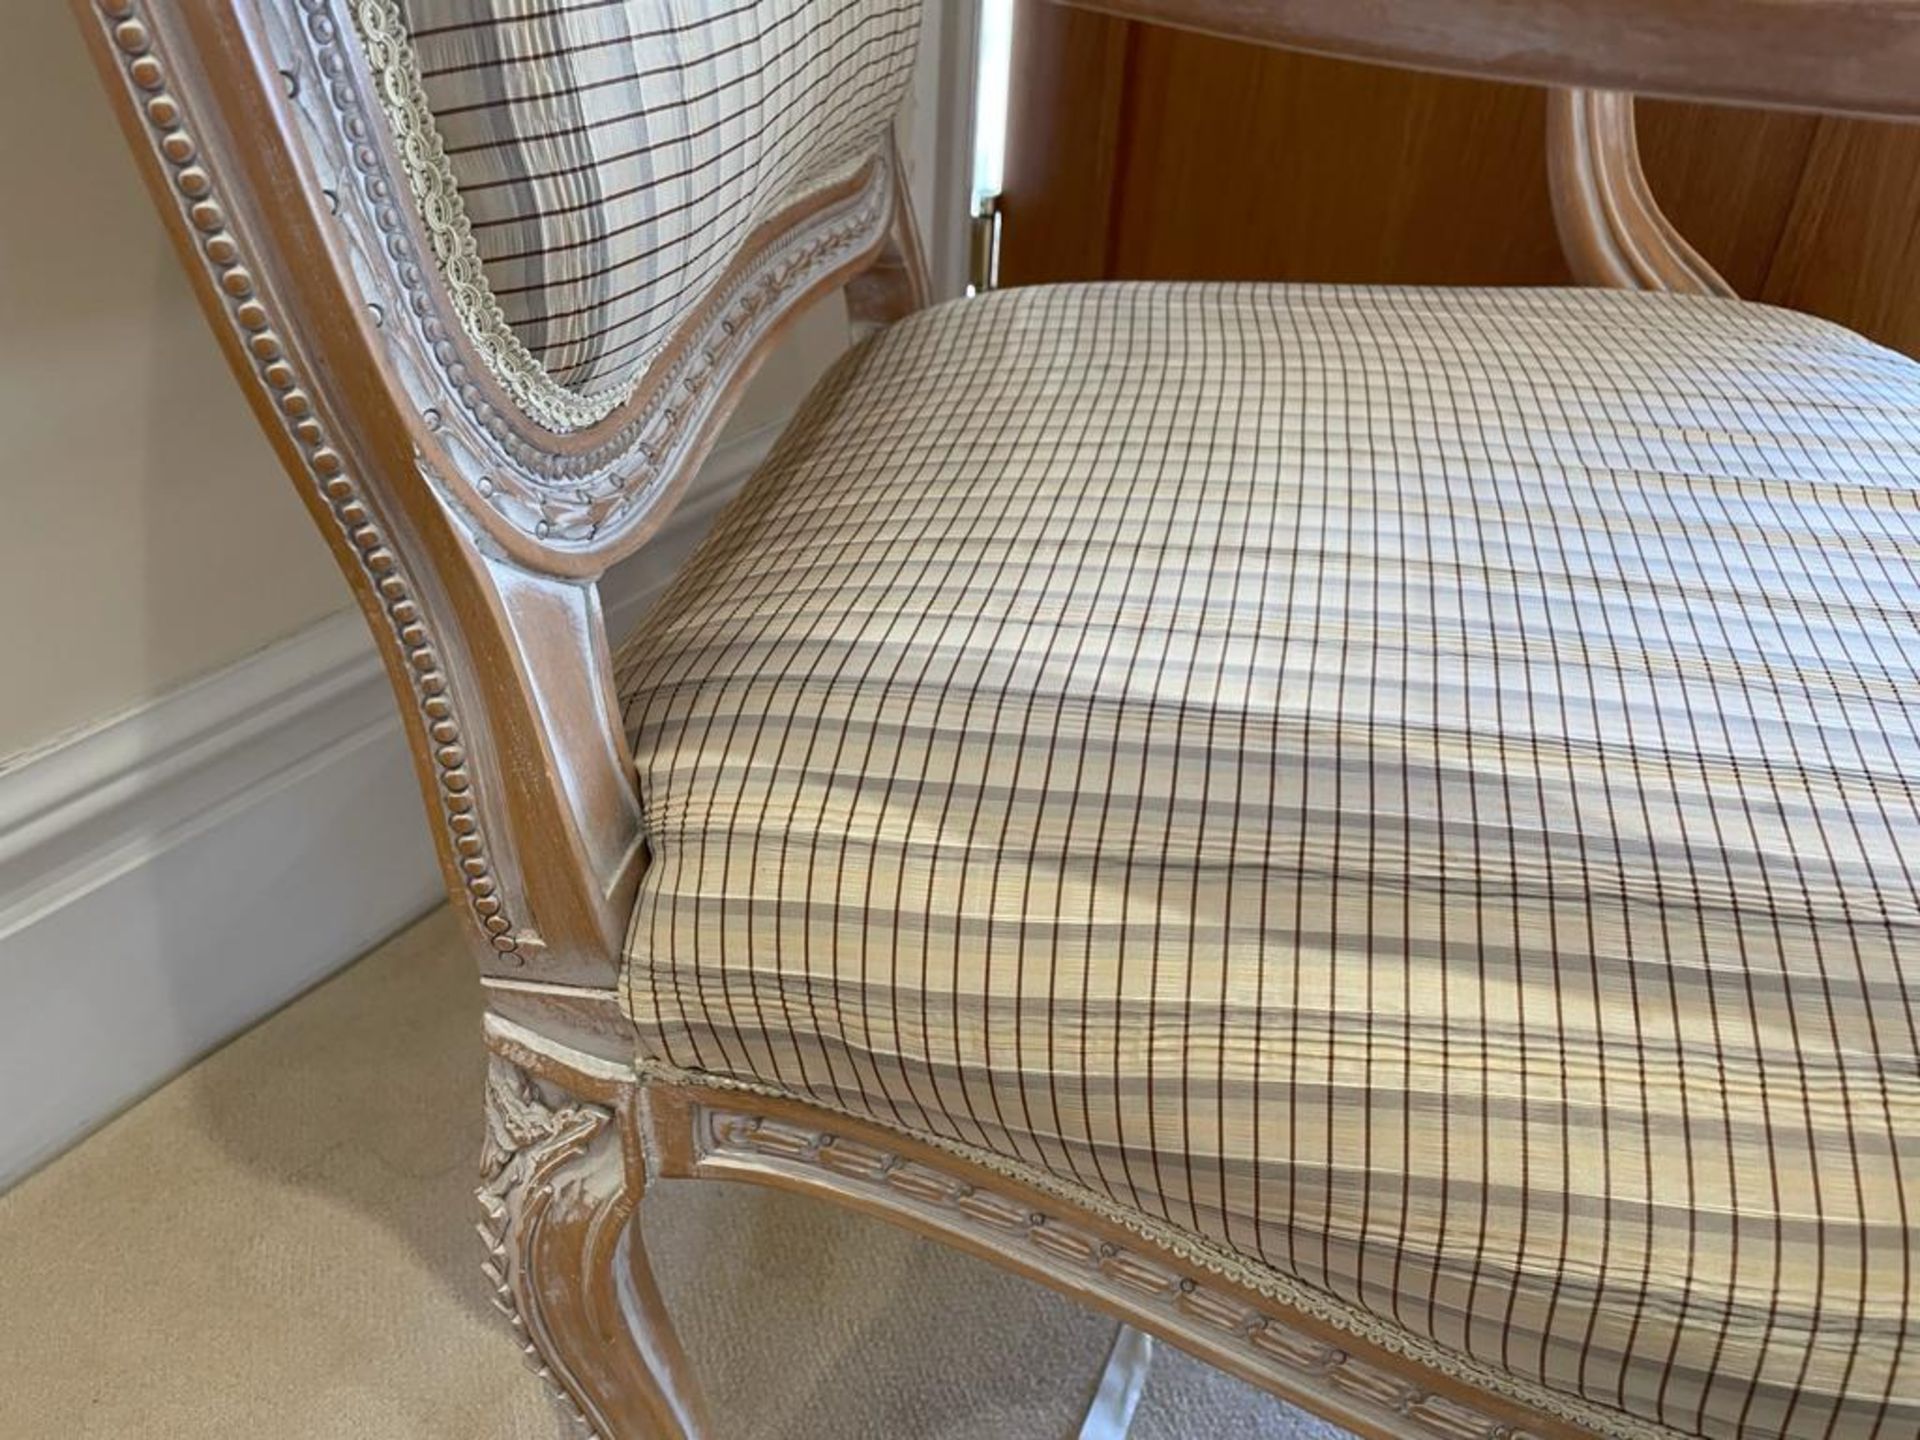 Pair of French Shabby Chic Bedroom Chairs - Stunning Carved Wood Chair Upholstered With Striped - Image 5 of 16